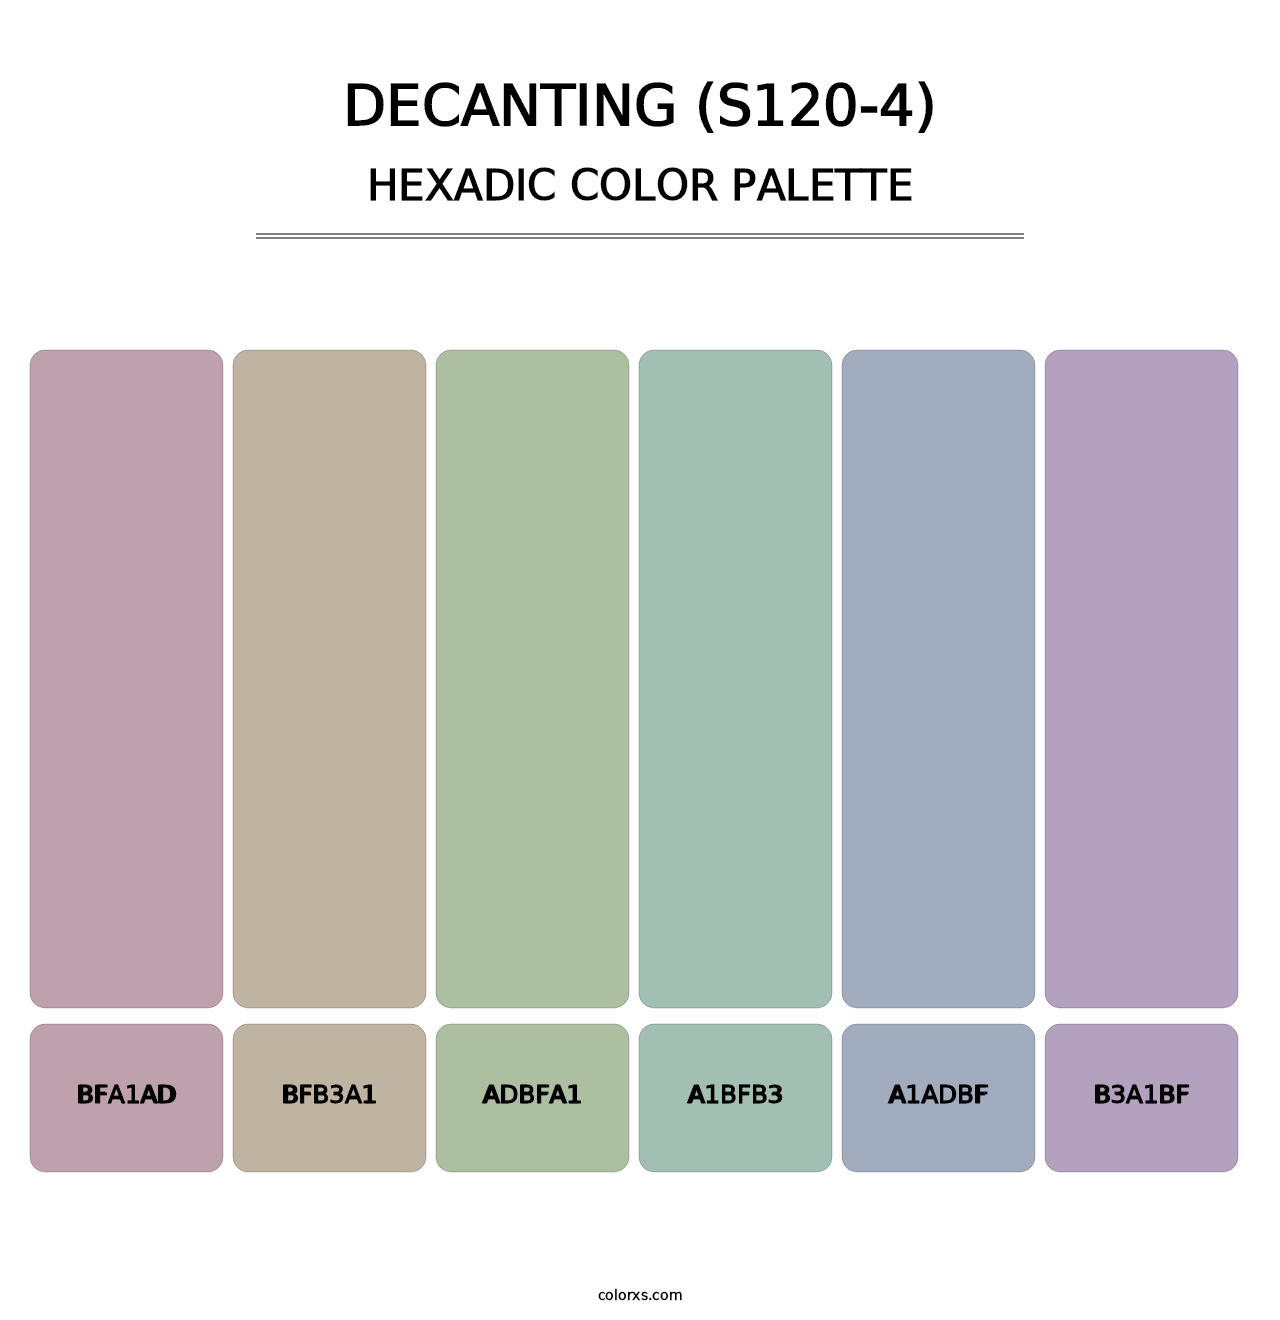 Decanting (S120-4) - Hexadic Color Palette